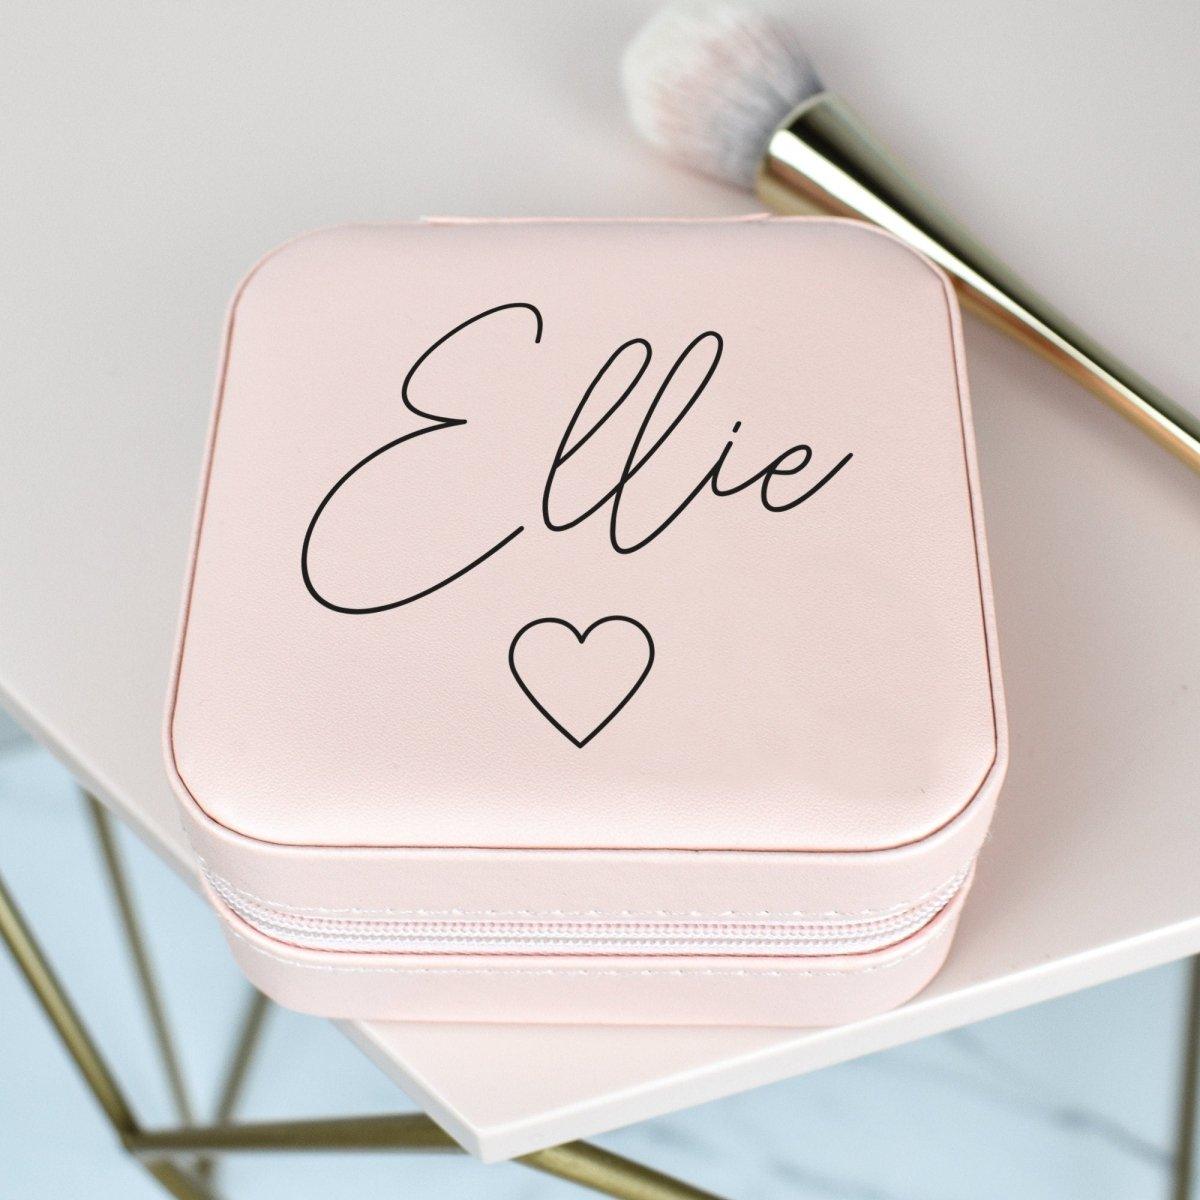 Personalised Mini Jewellery Box, Travel Jewellery Case, Bridesmaid Gift, Mothers Day, Jewellery Orangiser Storage, Travel Case, Gift for Her - Amy Lucy